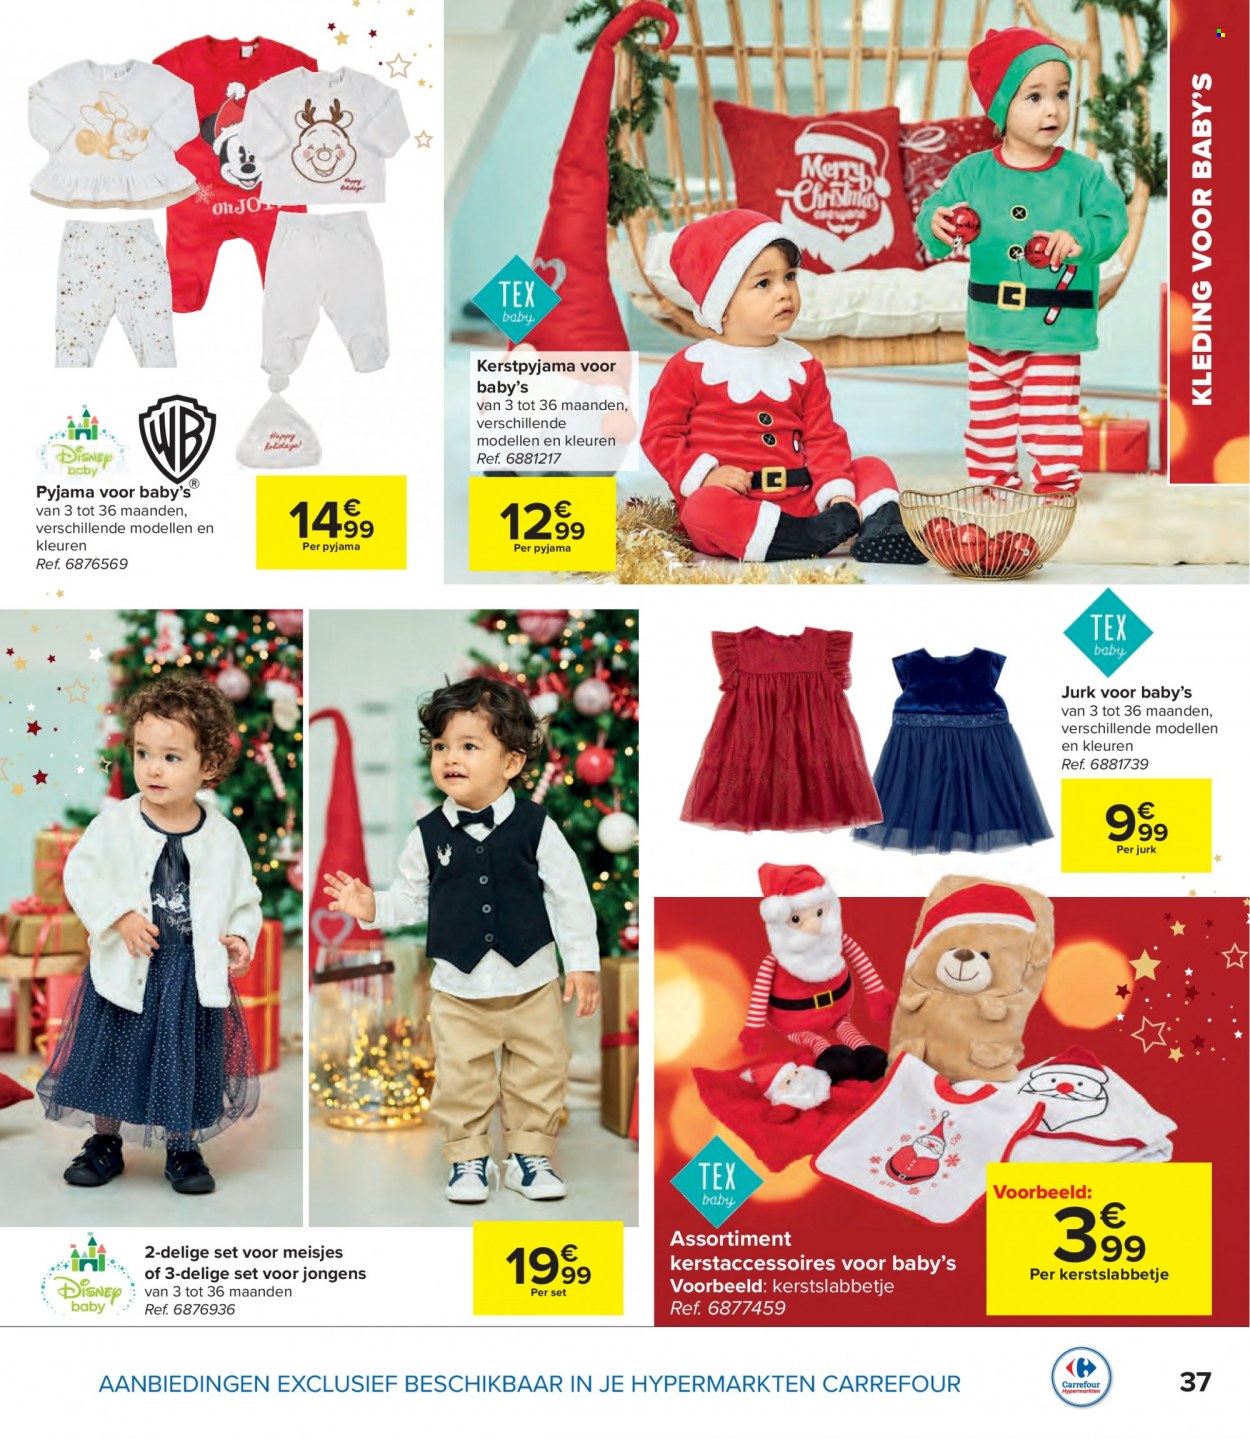 Catalogue Carrefour hypermarkt - 16.11.2022 - 31.12.2022. Page 37.